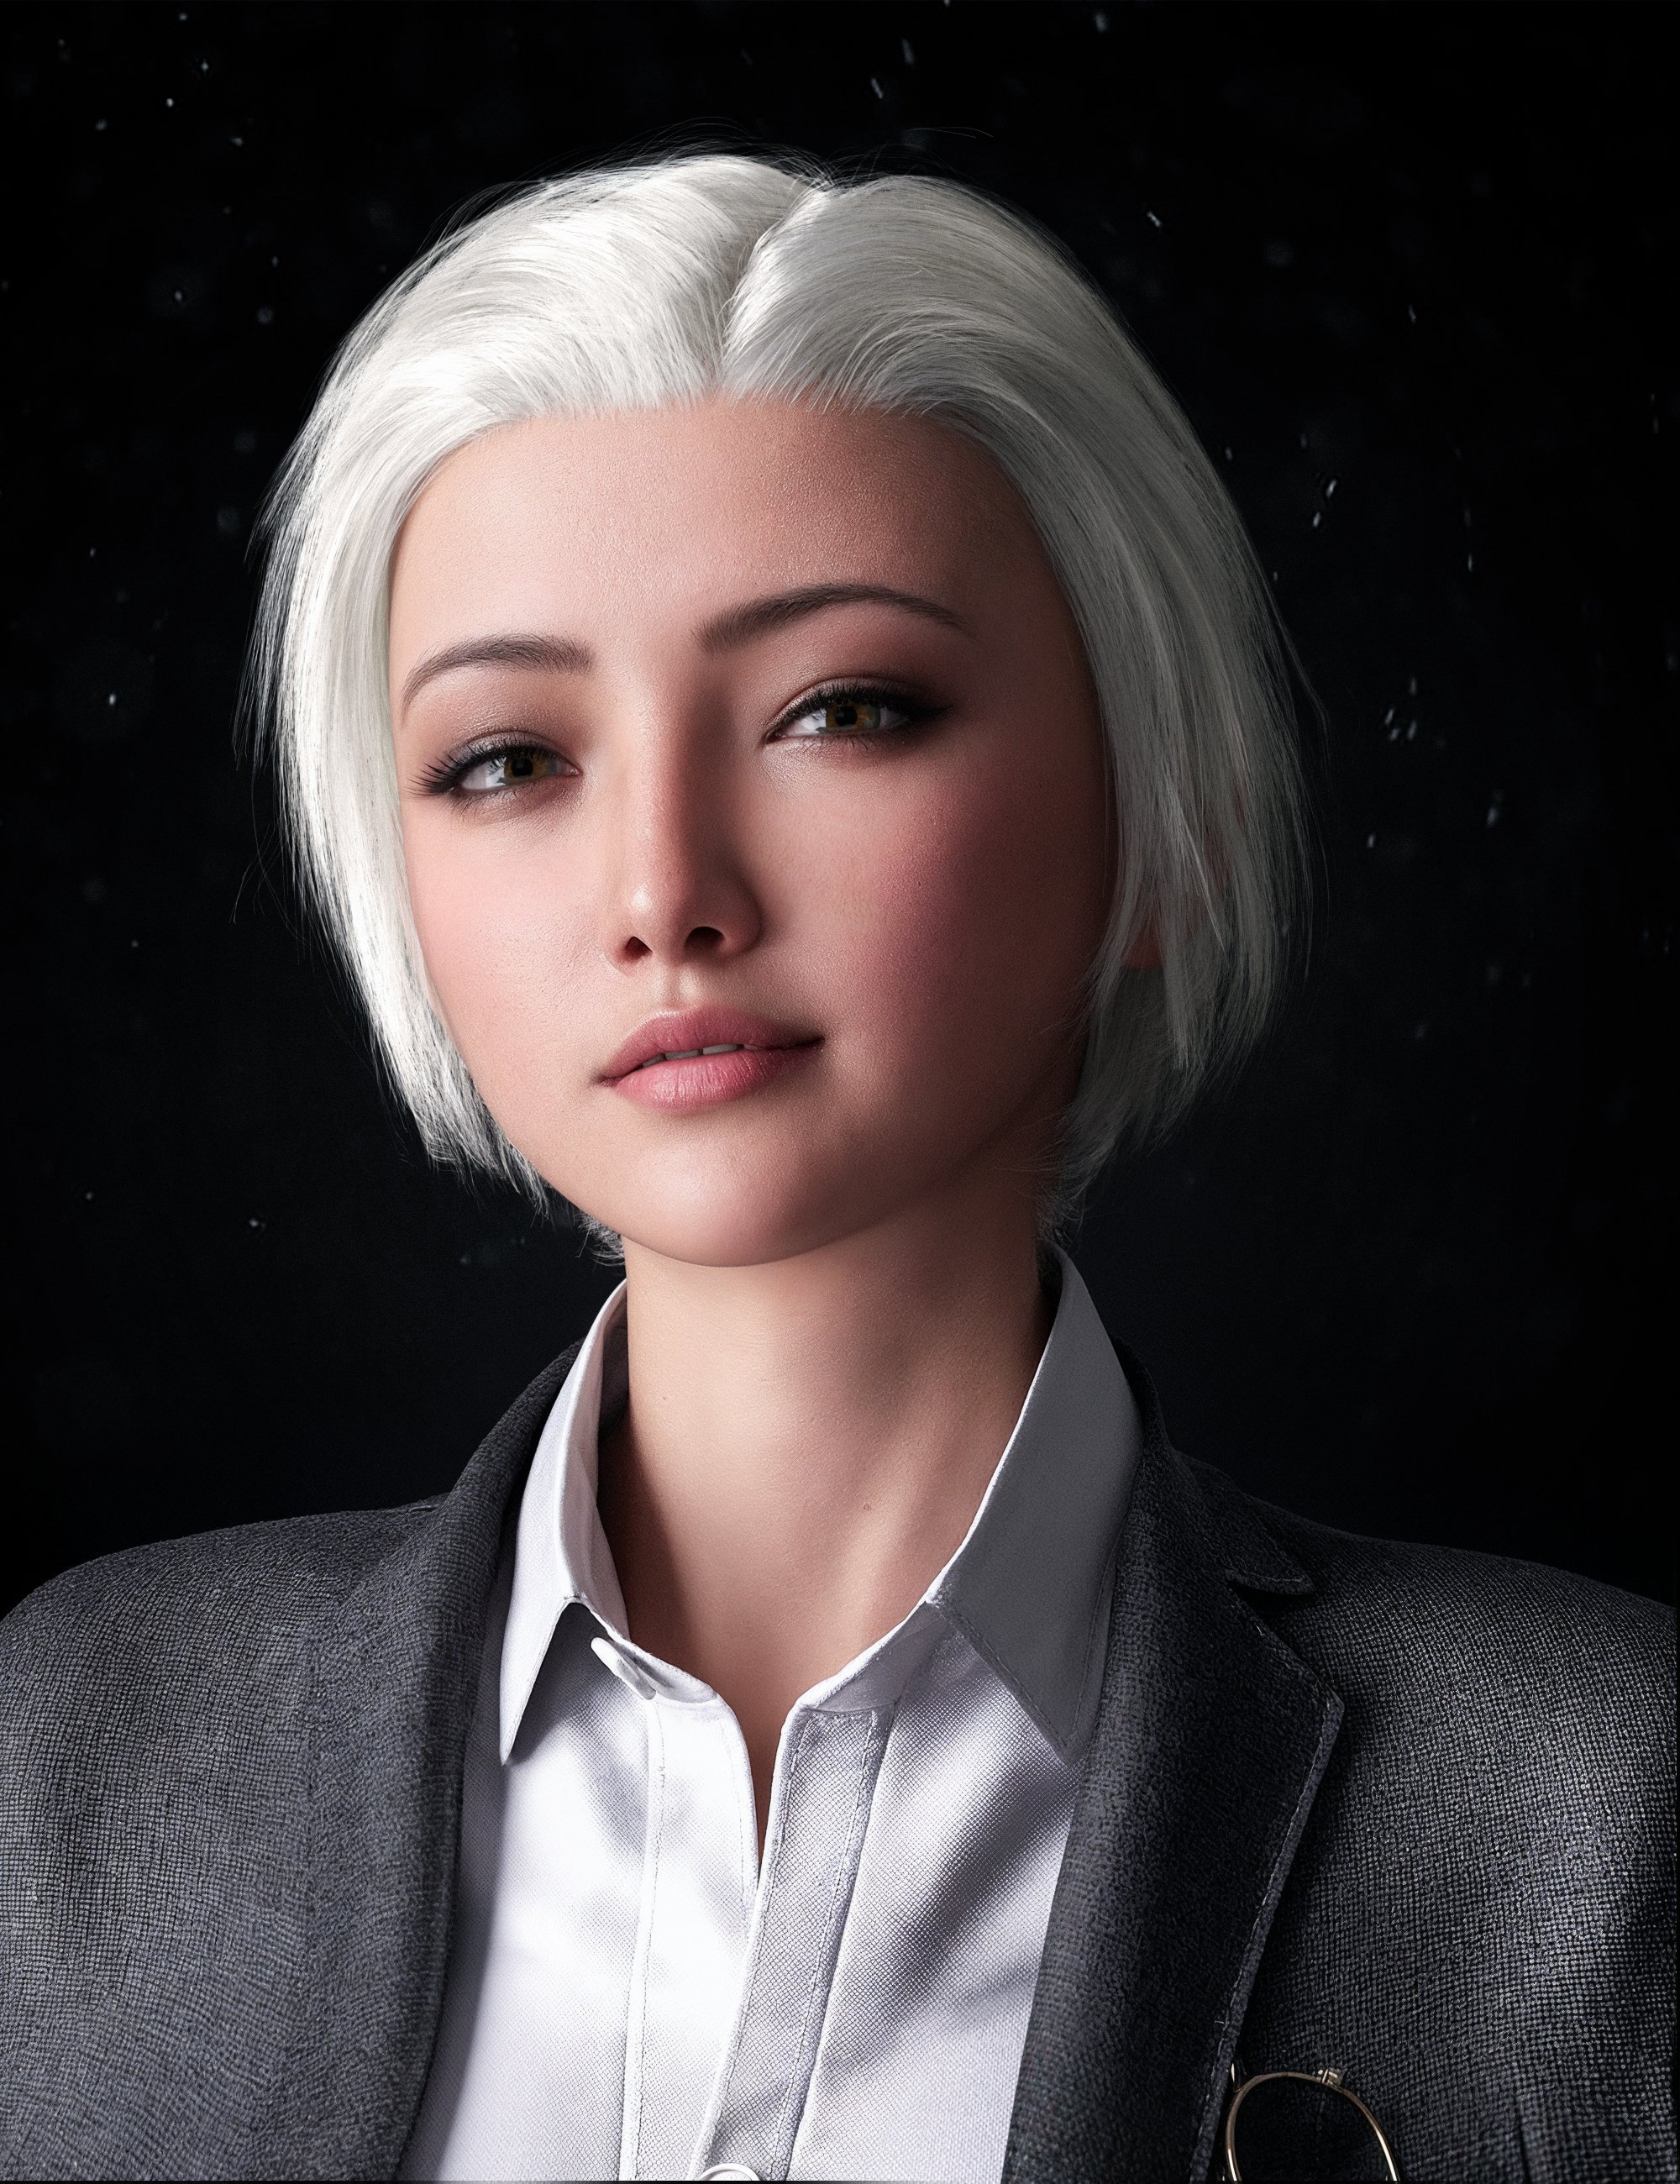 HS Gloria Sleek and Wet Short Hair for Genesis 9, 8, and 8.1, Female by: Hair Studio, 3D Models by Daz 3D